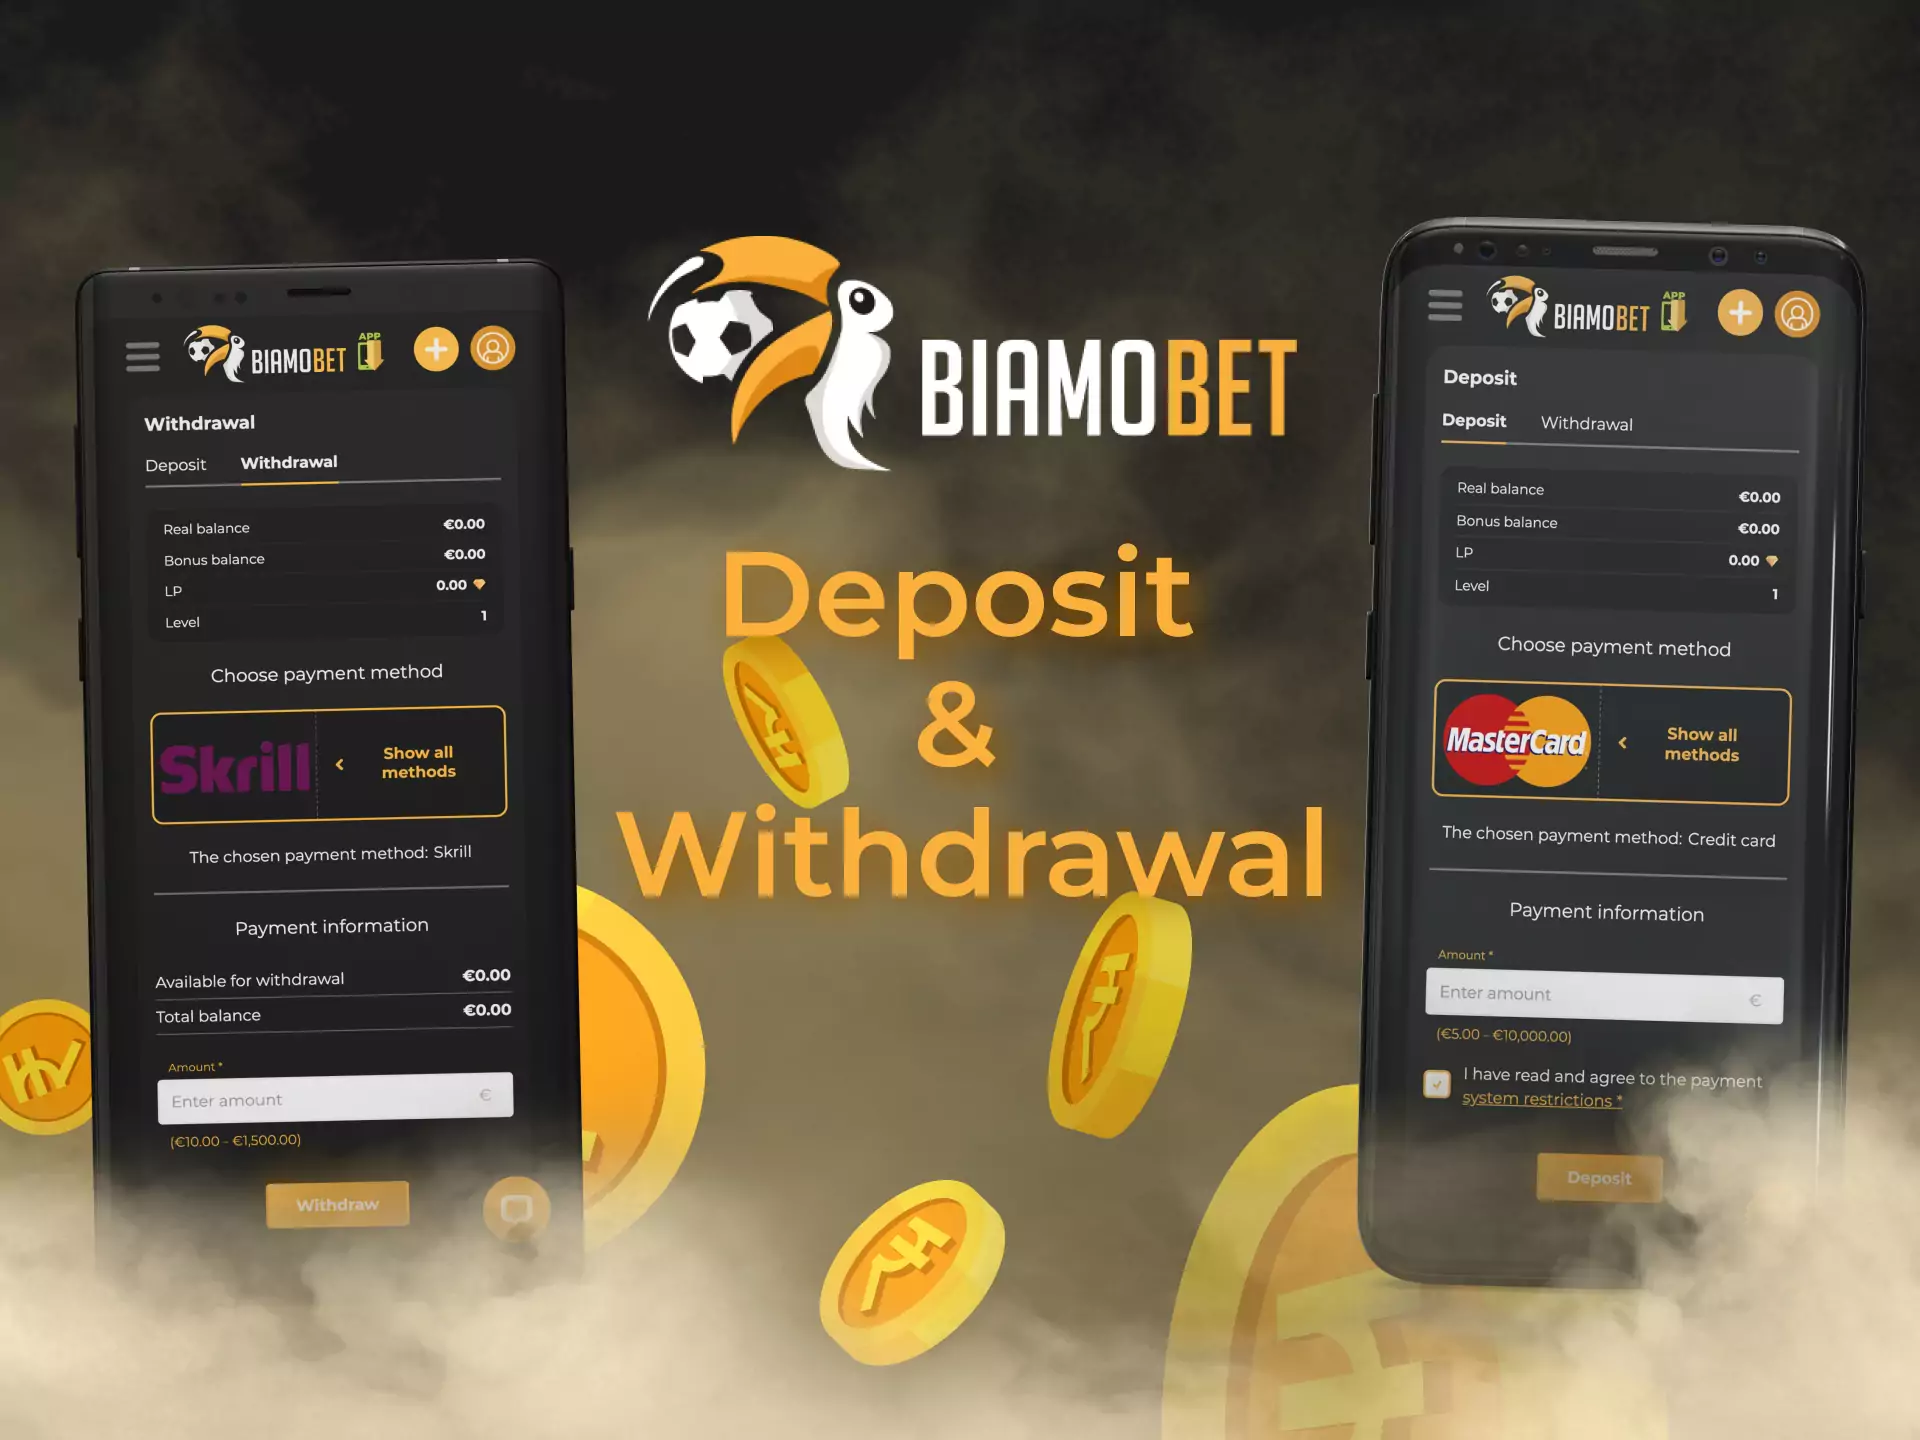 In the personal profile, you can top up your Biamobet account and withdraw winnings from it.